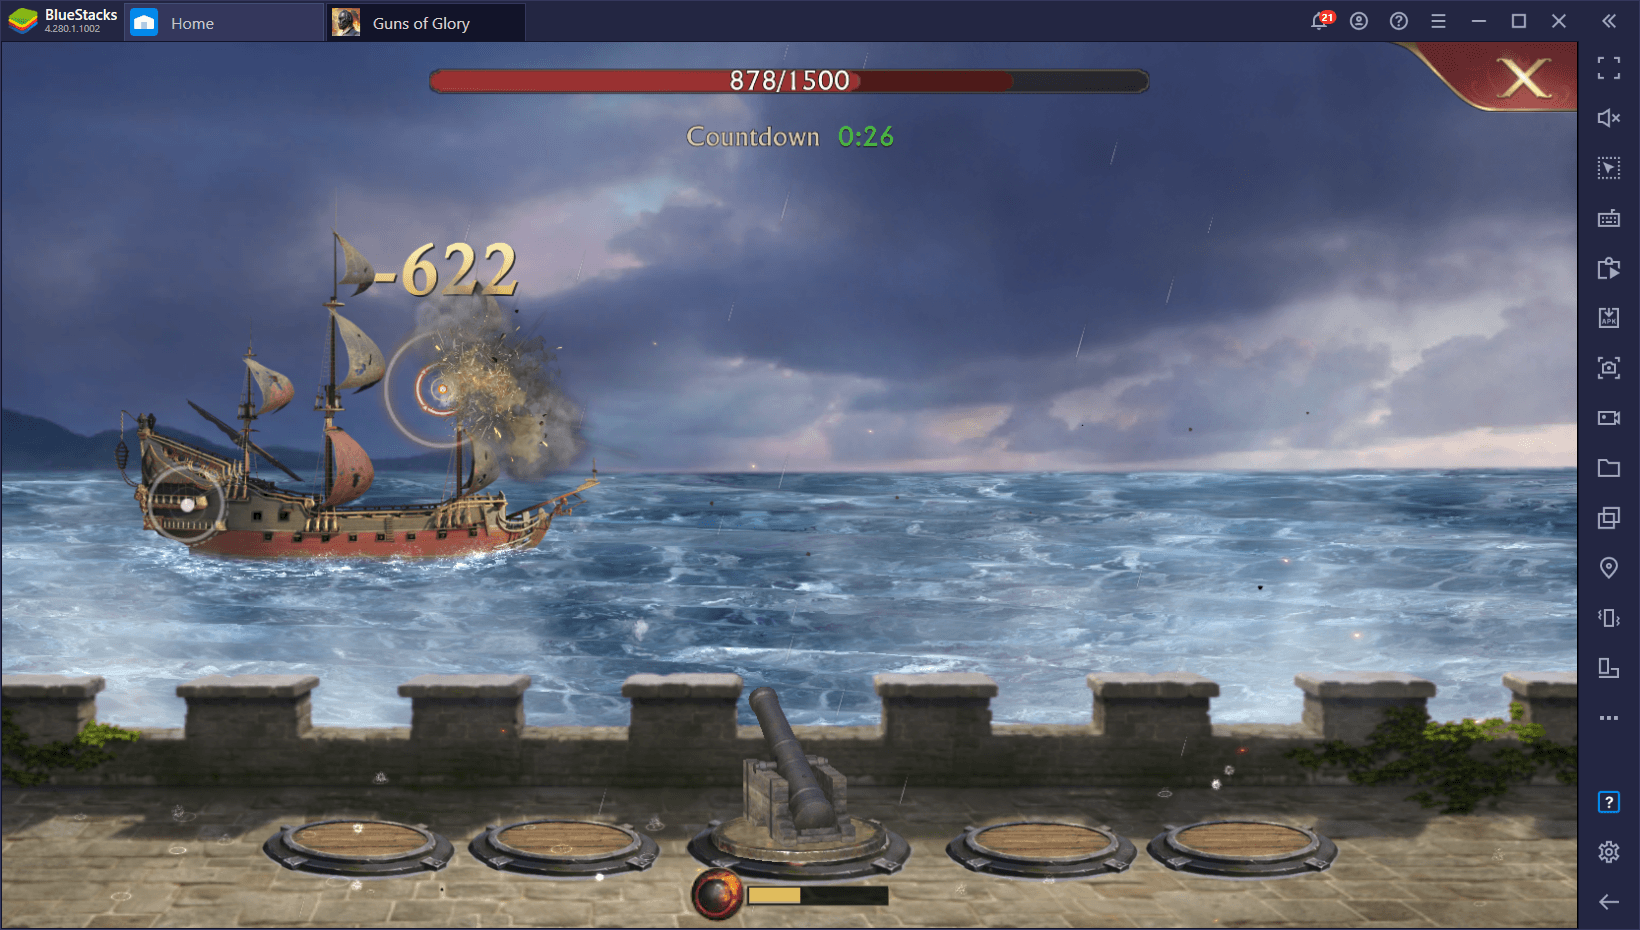 Guns of Glory on PC - How to Use BlueStacks’ Tools to Dominate Your Enemies